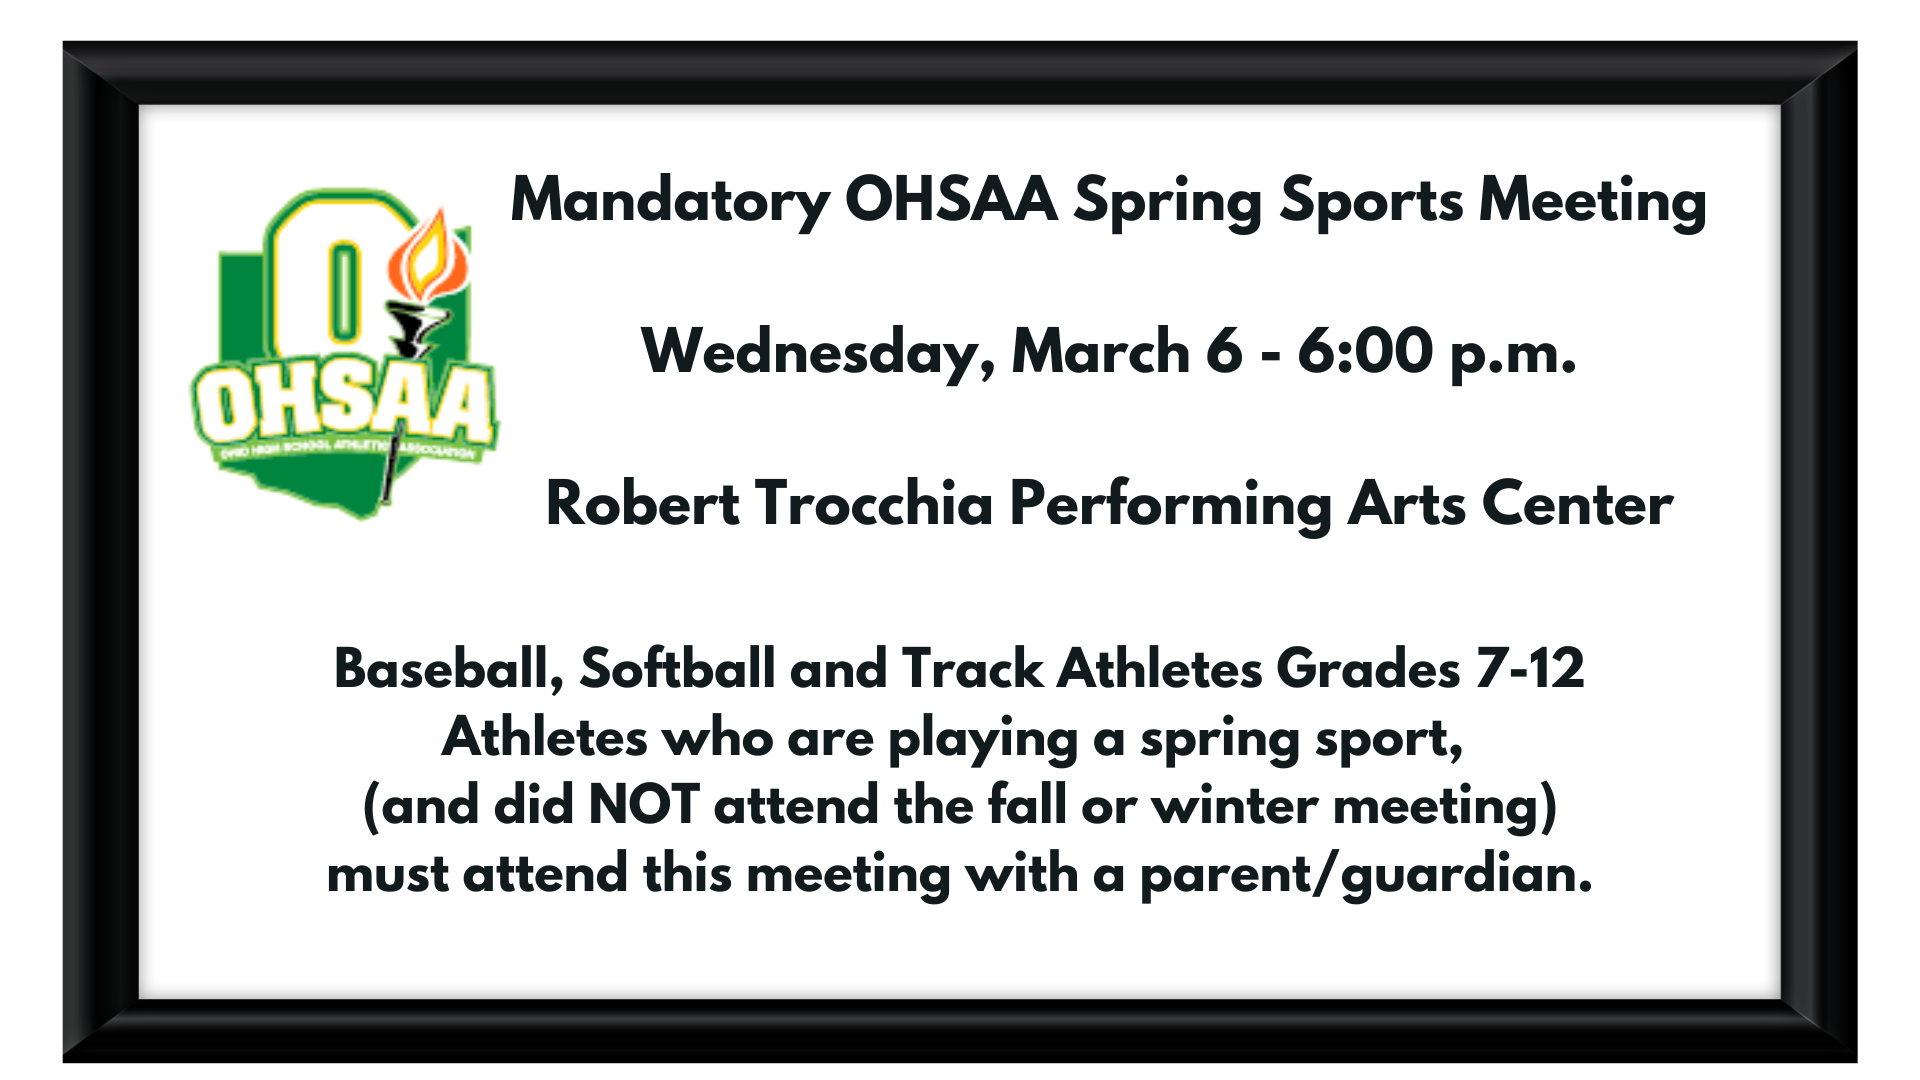 Spring OHSAA Mandatory Meeting March 6 at 6 p.m. in the Robert Trocchia Performing Arts Center